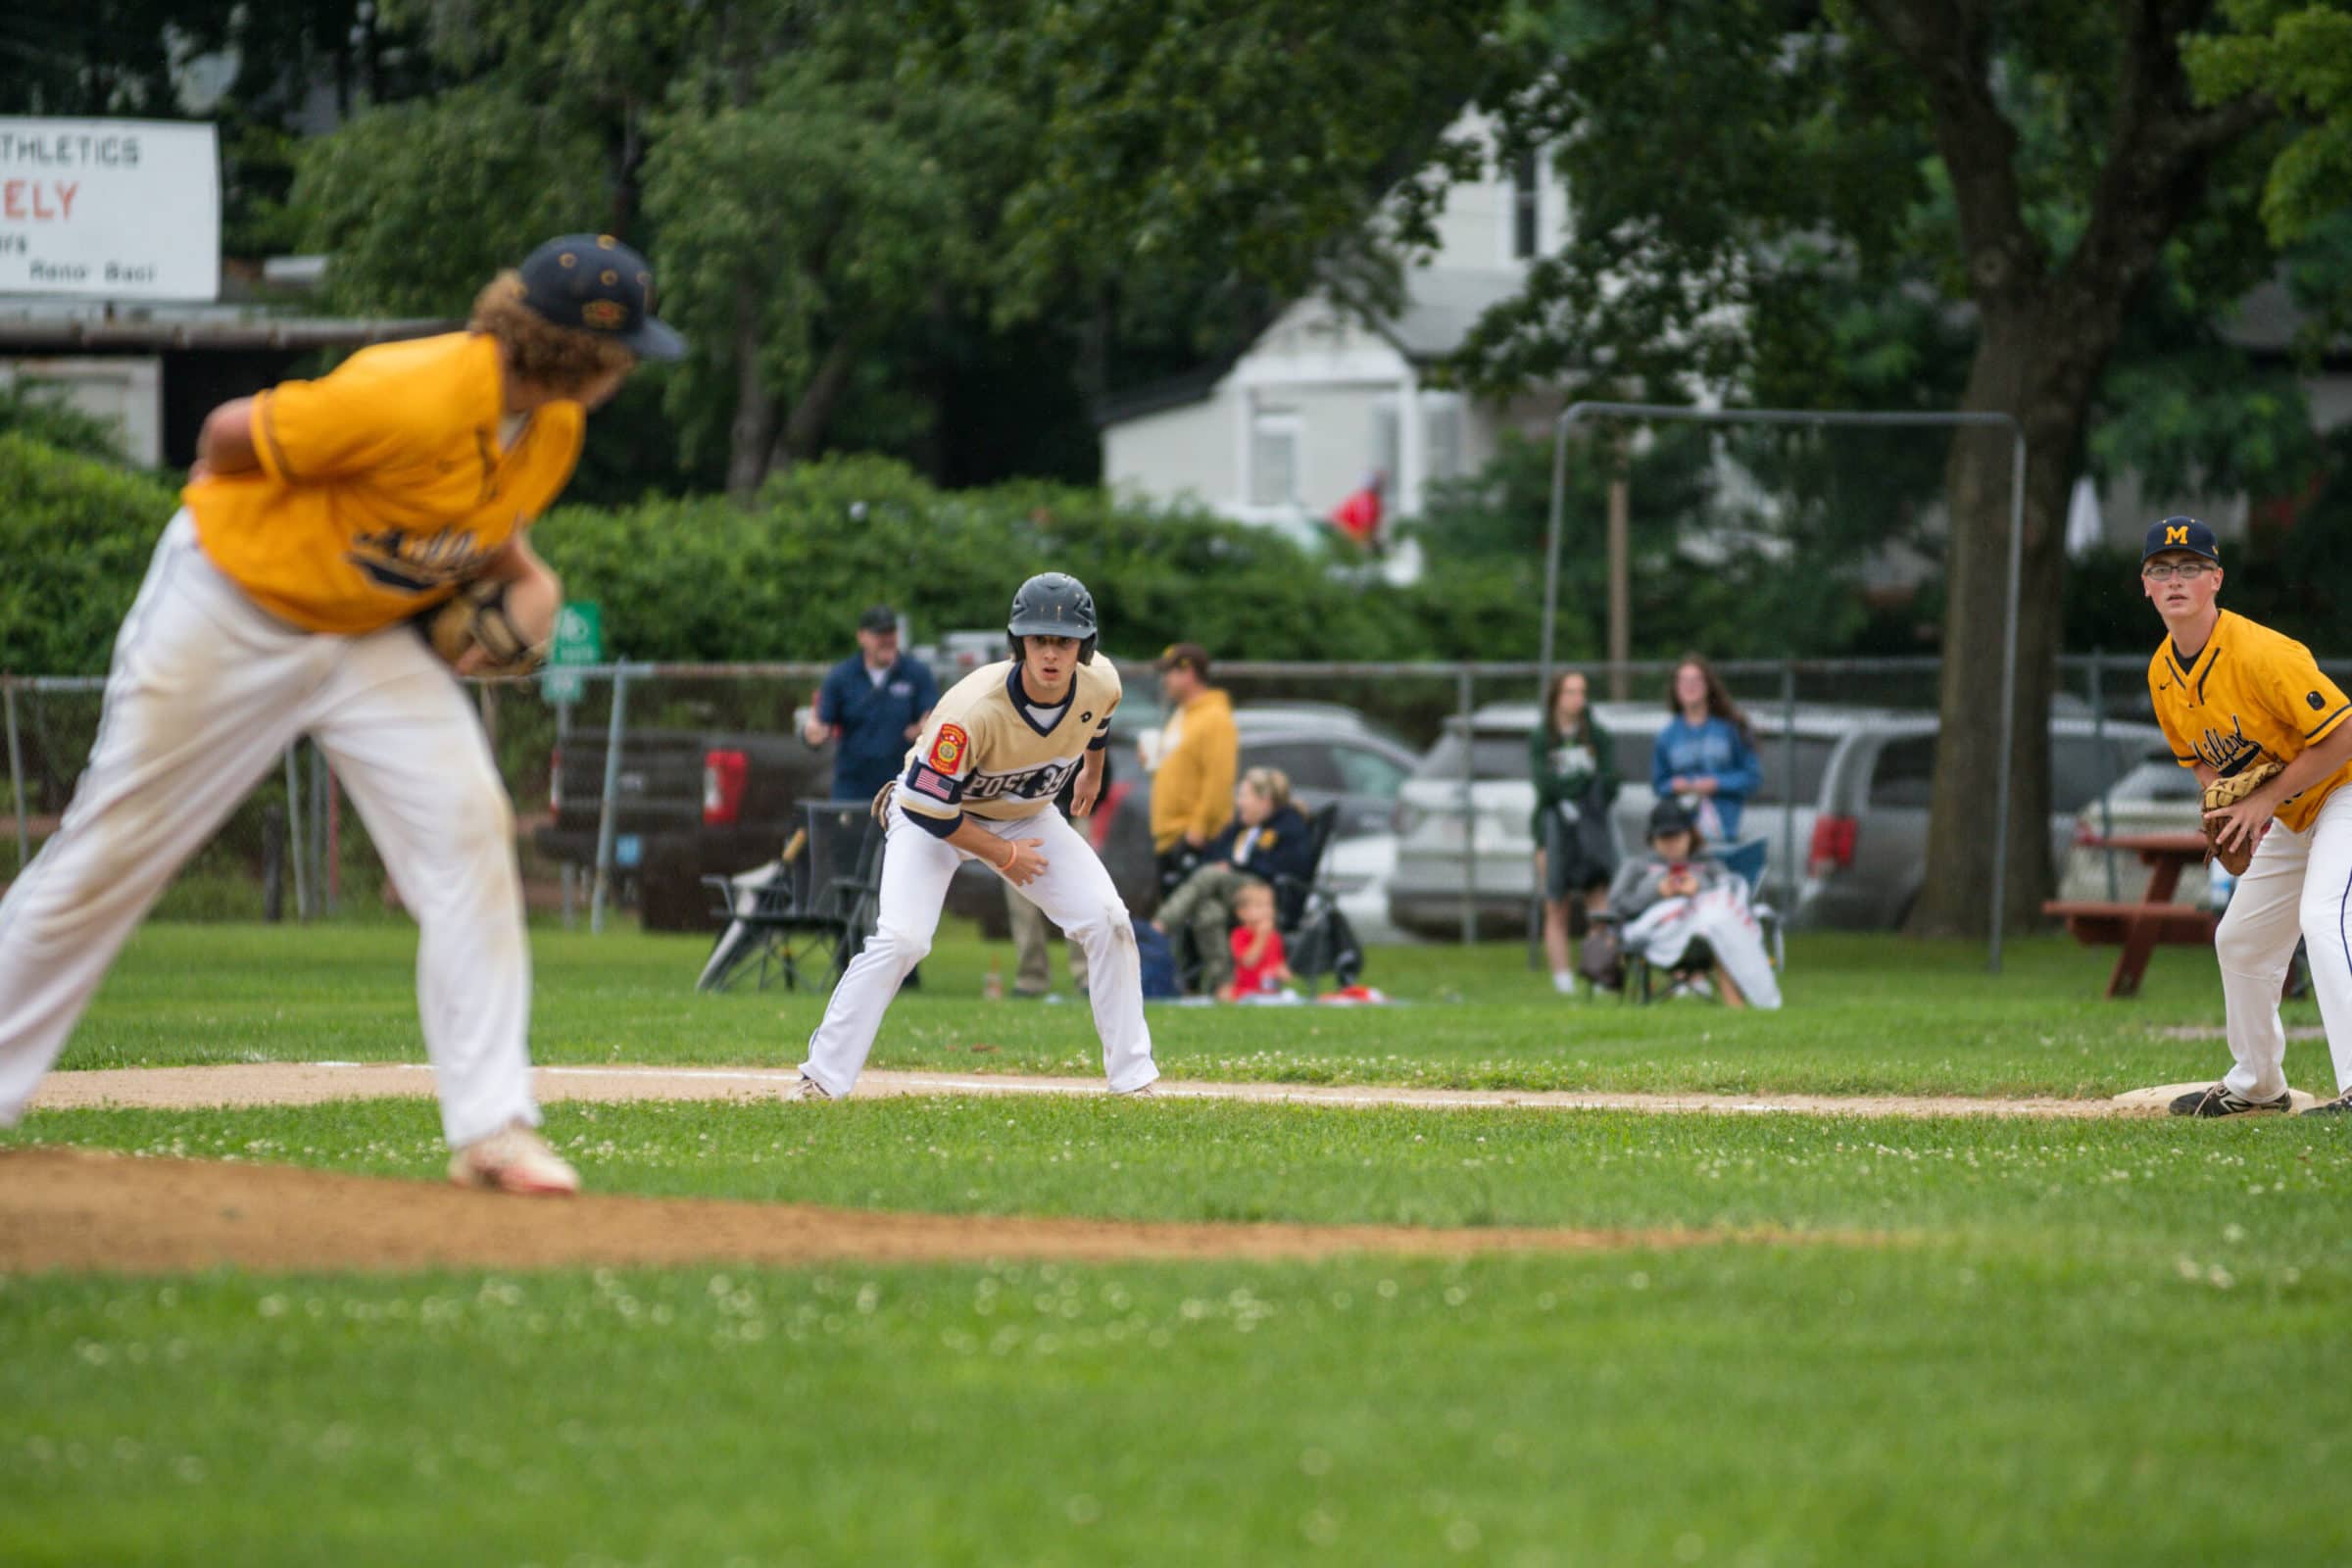 A Shrewsbury base runner looks to steal second base off while Milford’s pitcher closely watches his lead.